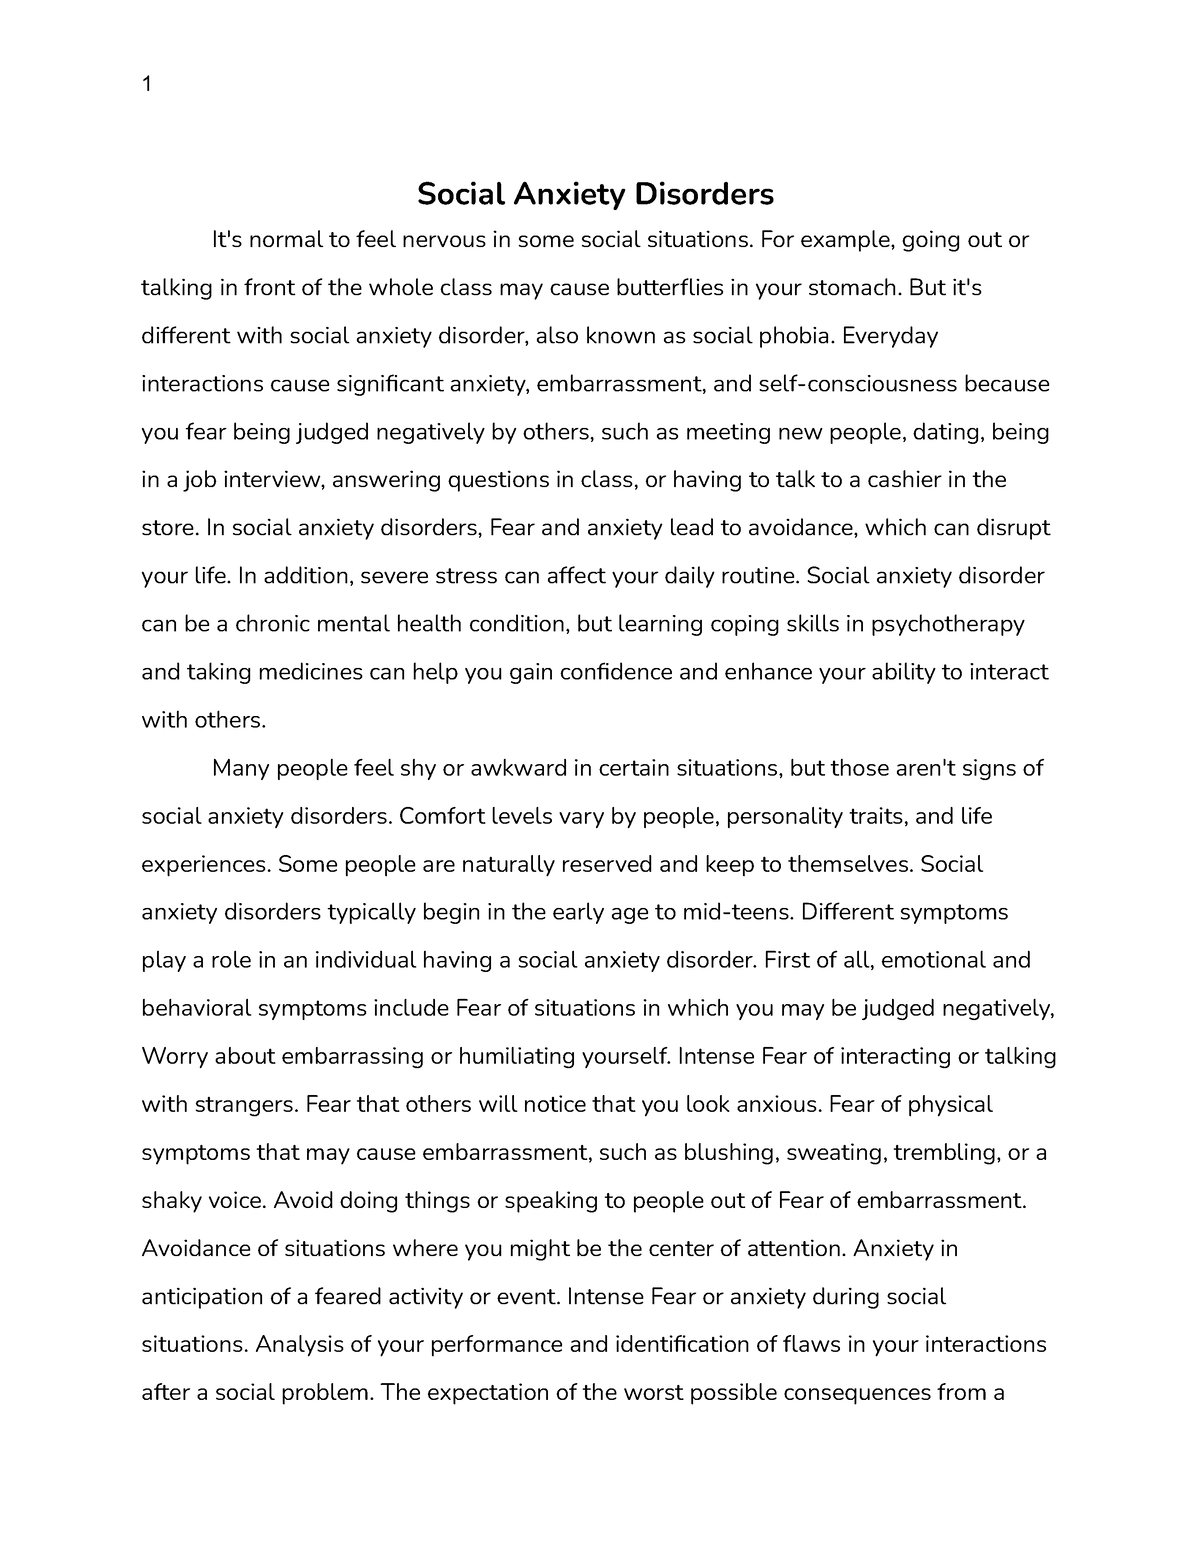 psychology research paper on anxiety